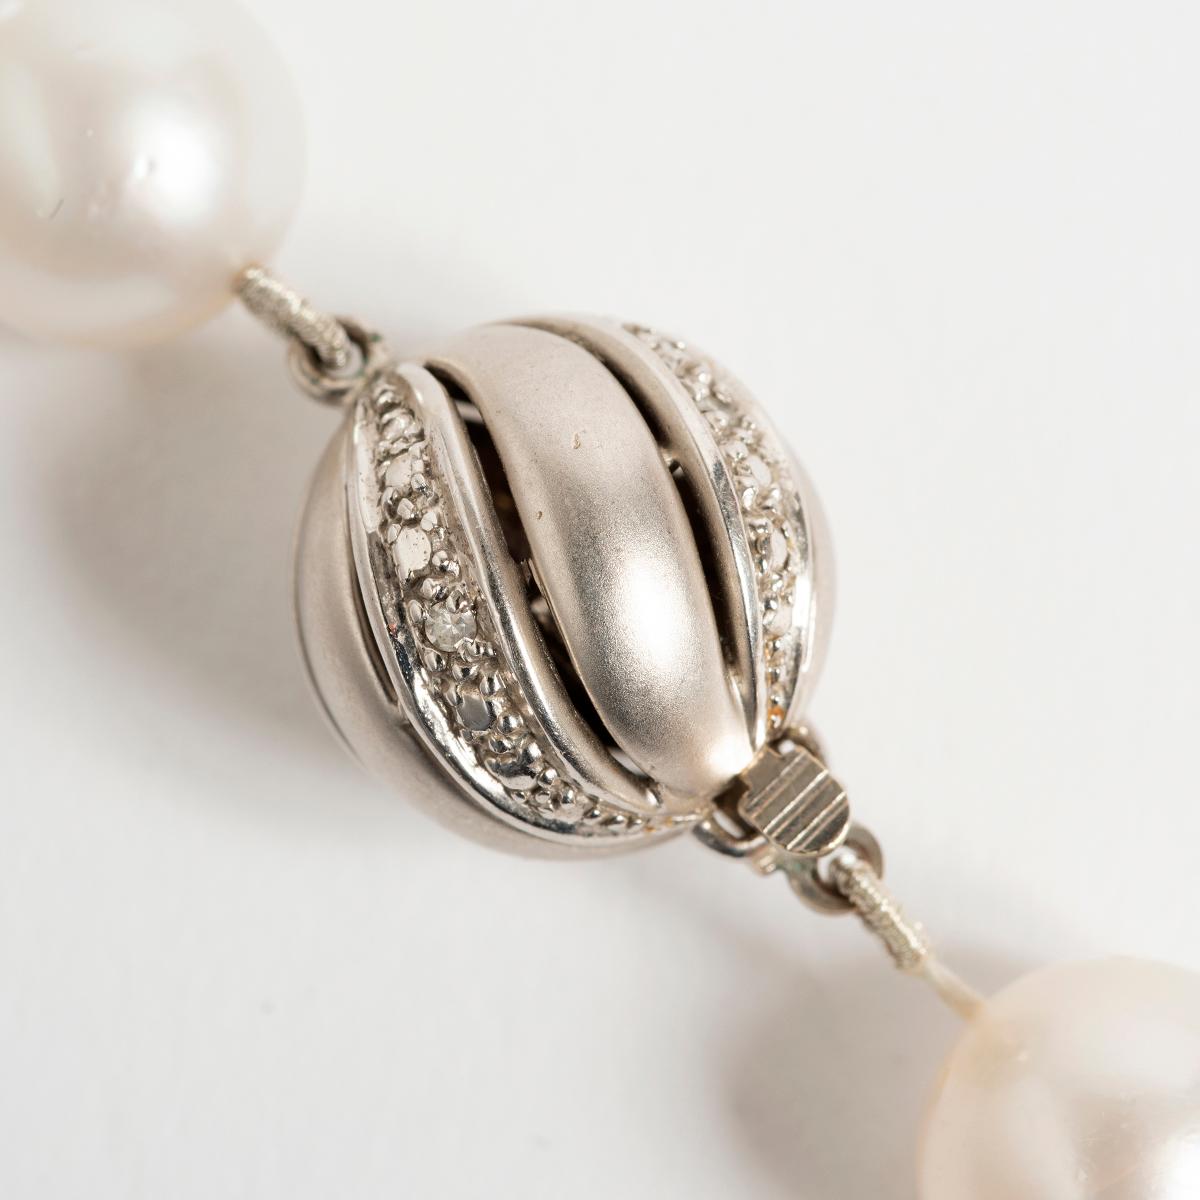 South Seas Pearl Necklace, 14 Karat White Gold Set, Polished Diamonds In Excellent Condition For Sale In Canterbury, GB